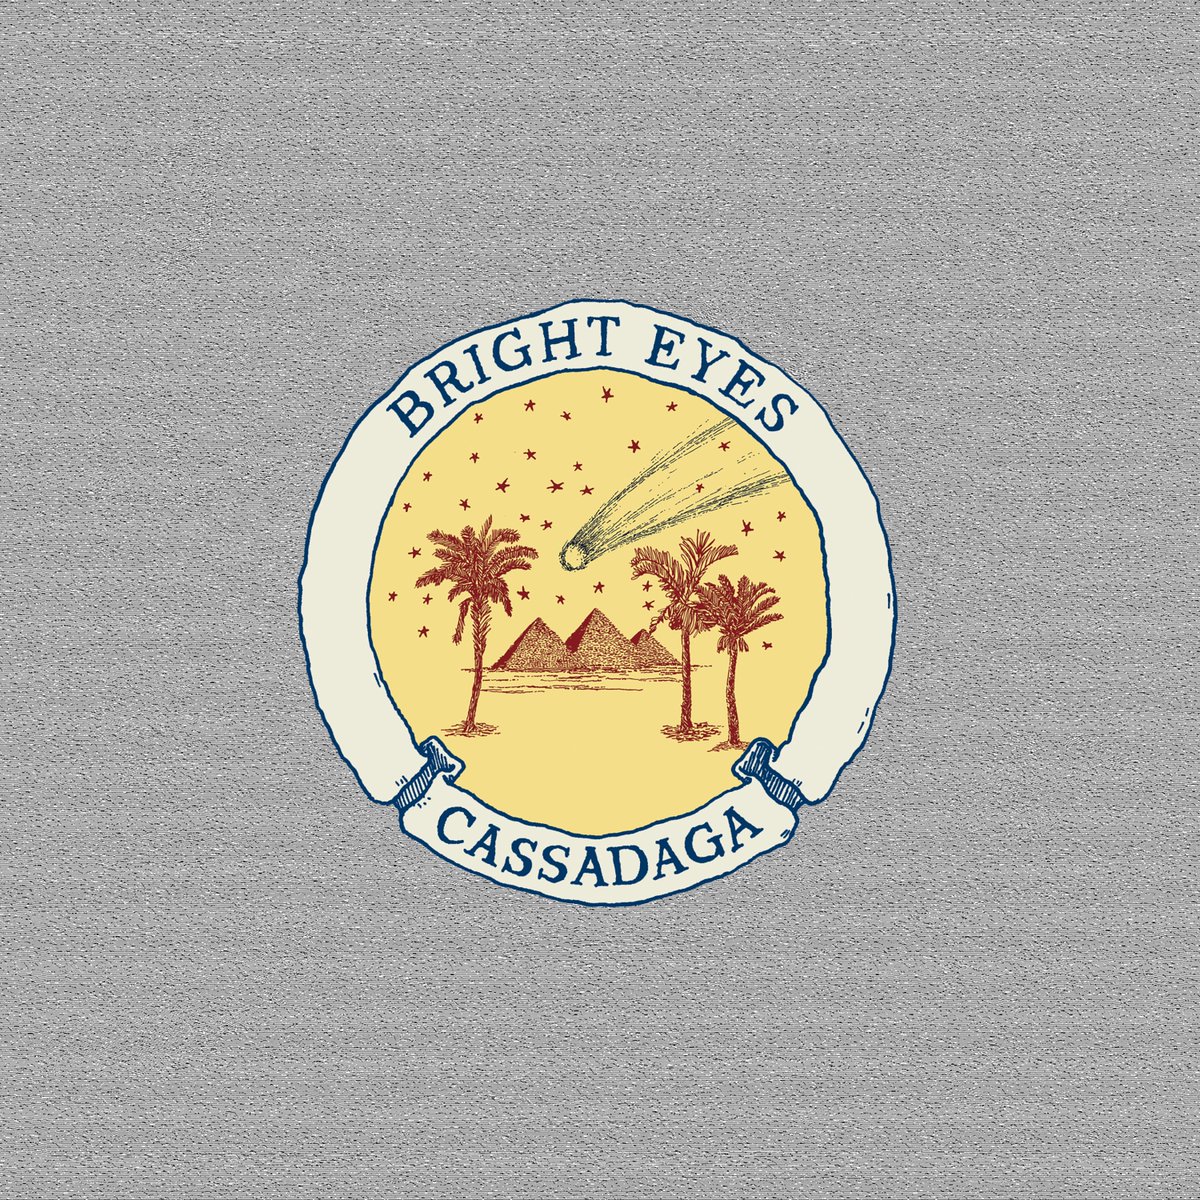 ‘Cassadaga’ was released 16 years to today! 🌴☄️✨ Today also marks one month until the next leg of Bright Eyes’ tour! Who’s coming out? All tour dates and tickets at thisisbrighteyes.com